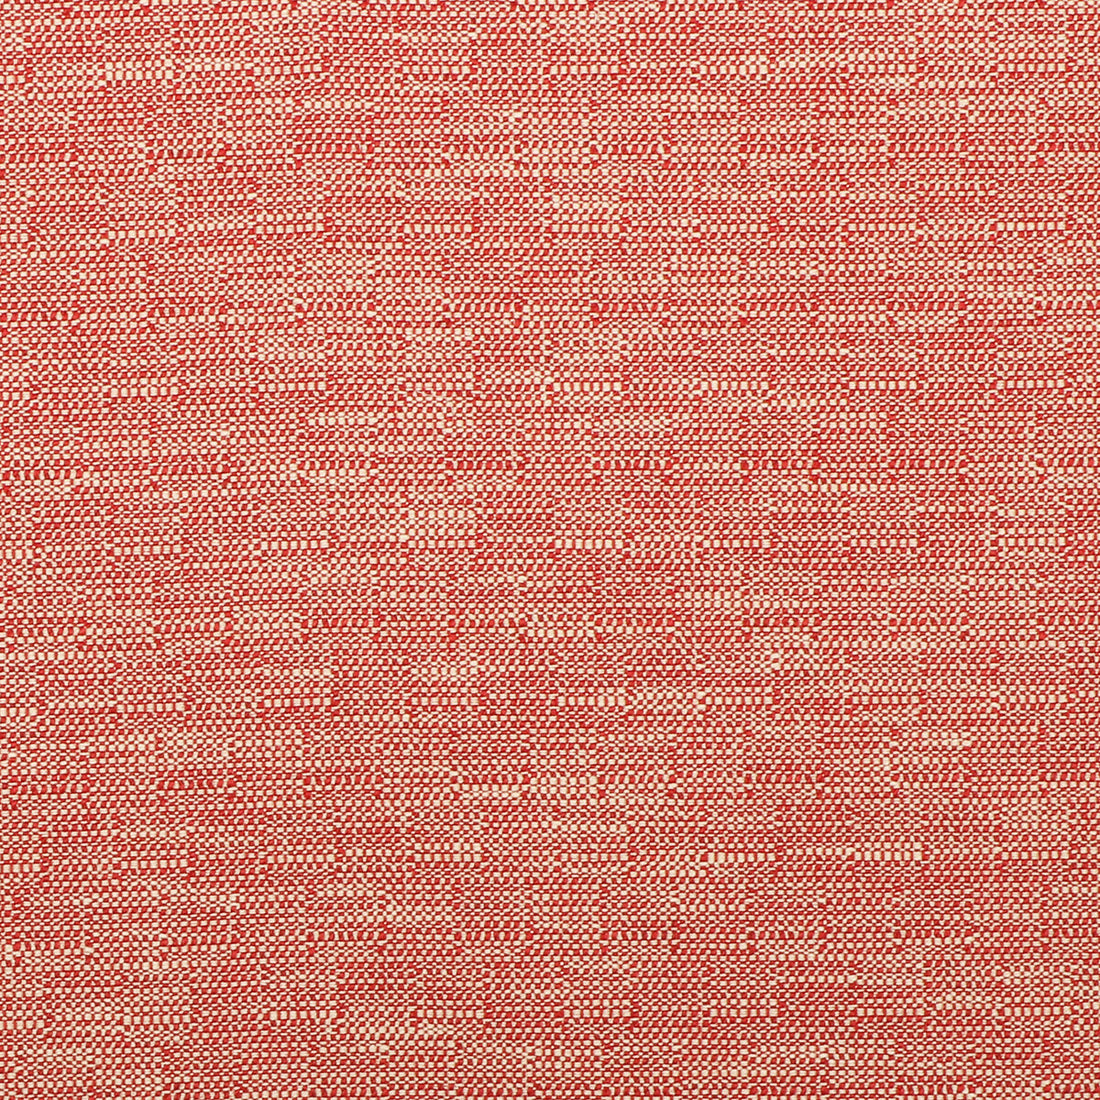 Kravet Smart fabric in 35518-19 color - pattern 35518.19.0 - by Kravet Smart in the Inside Out Performance Fabrics collection